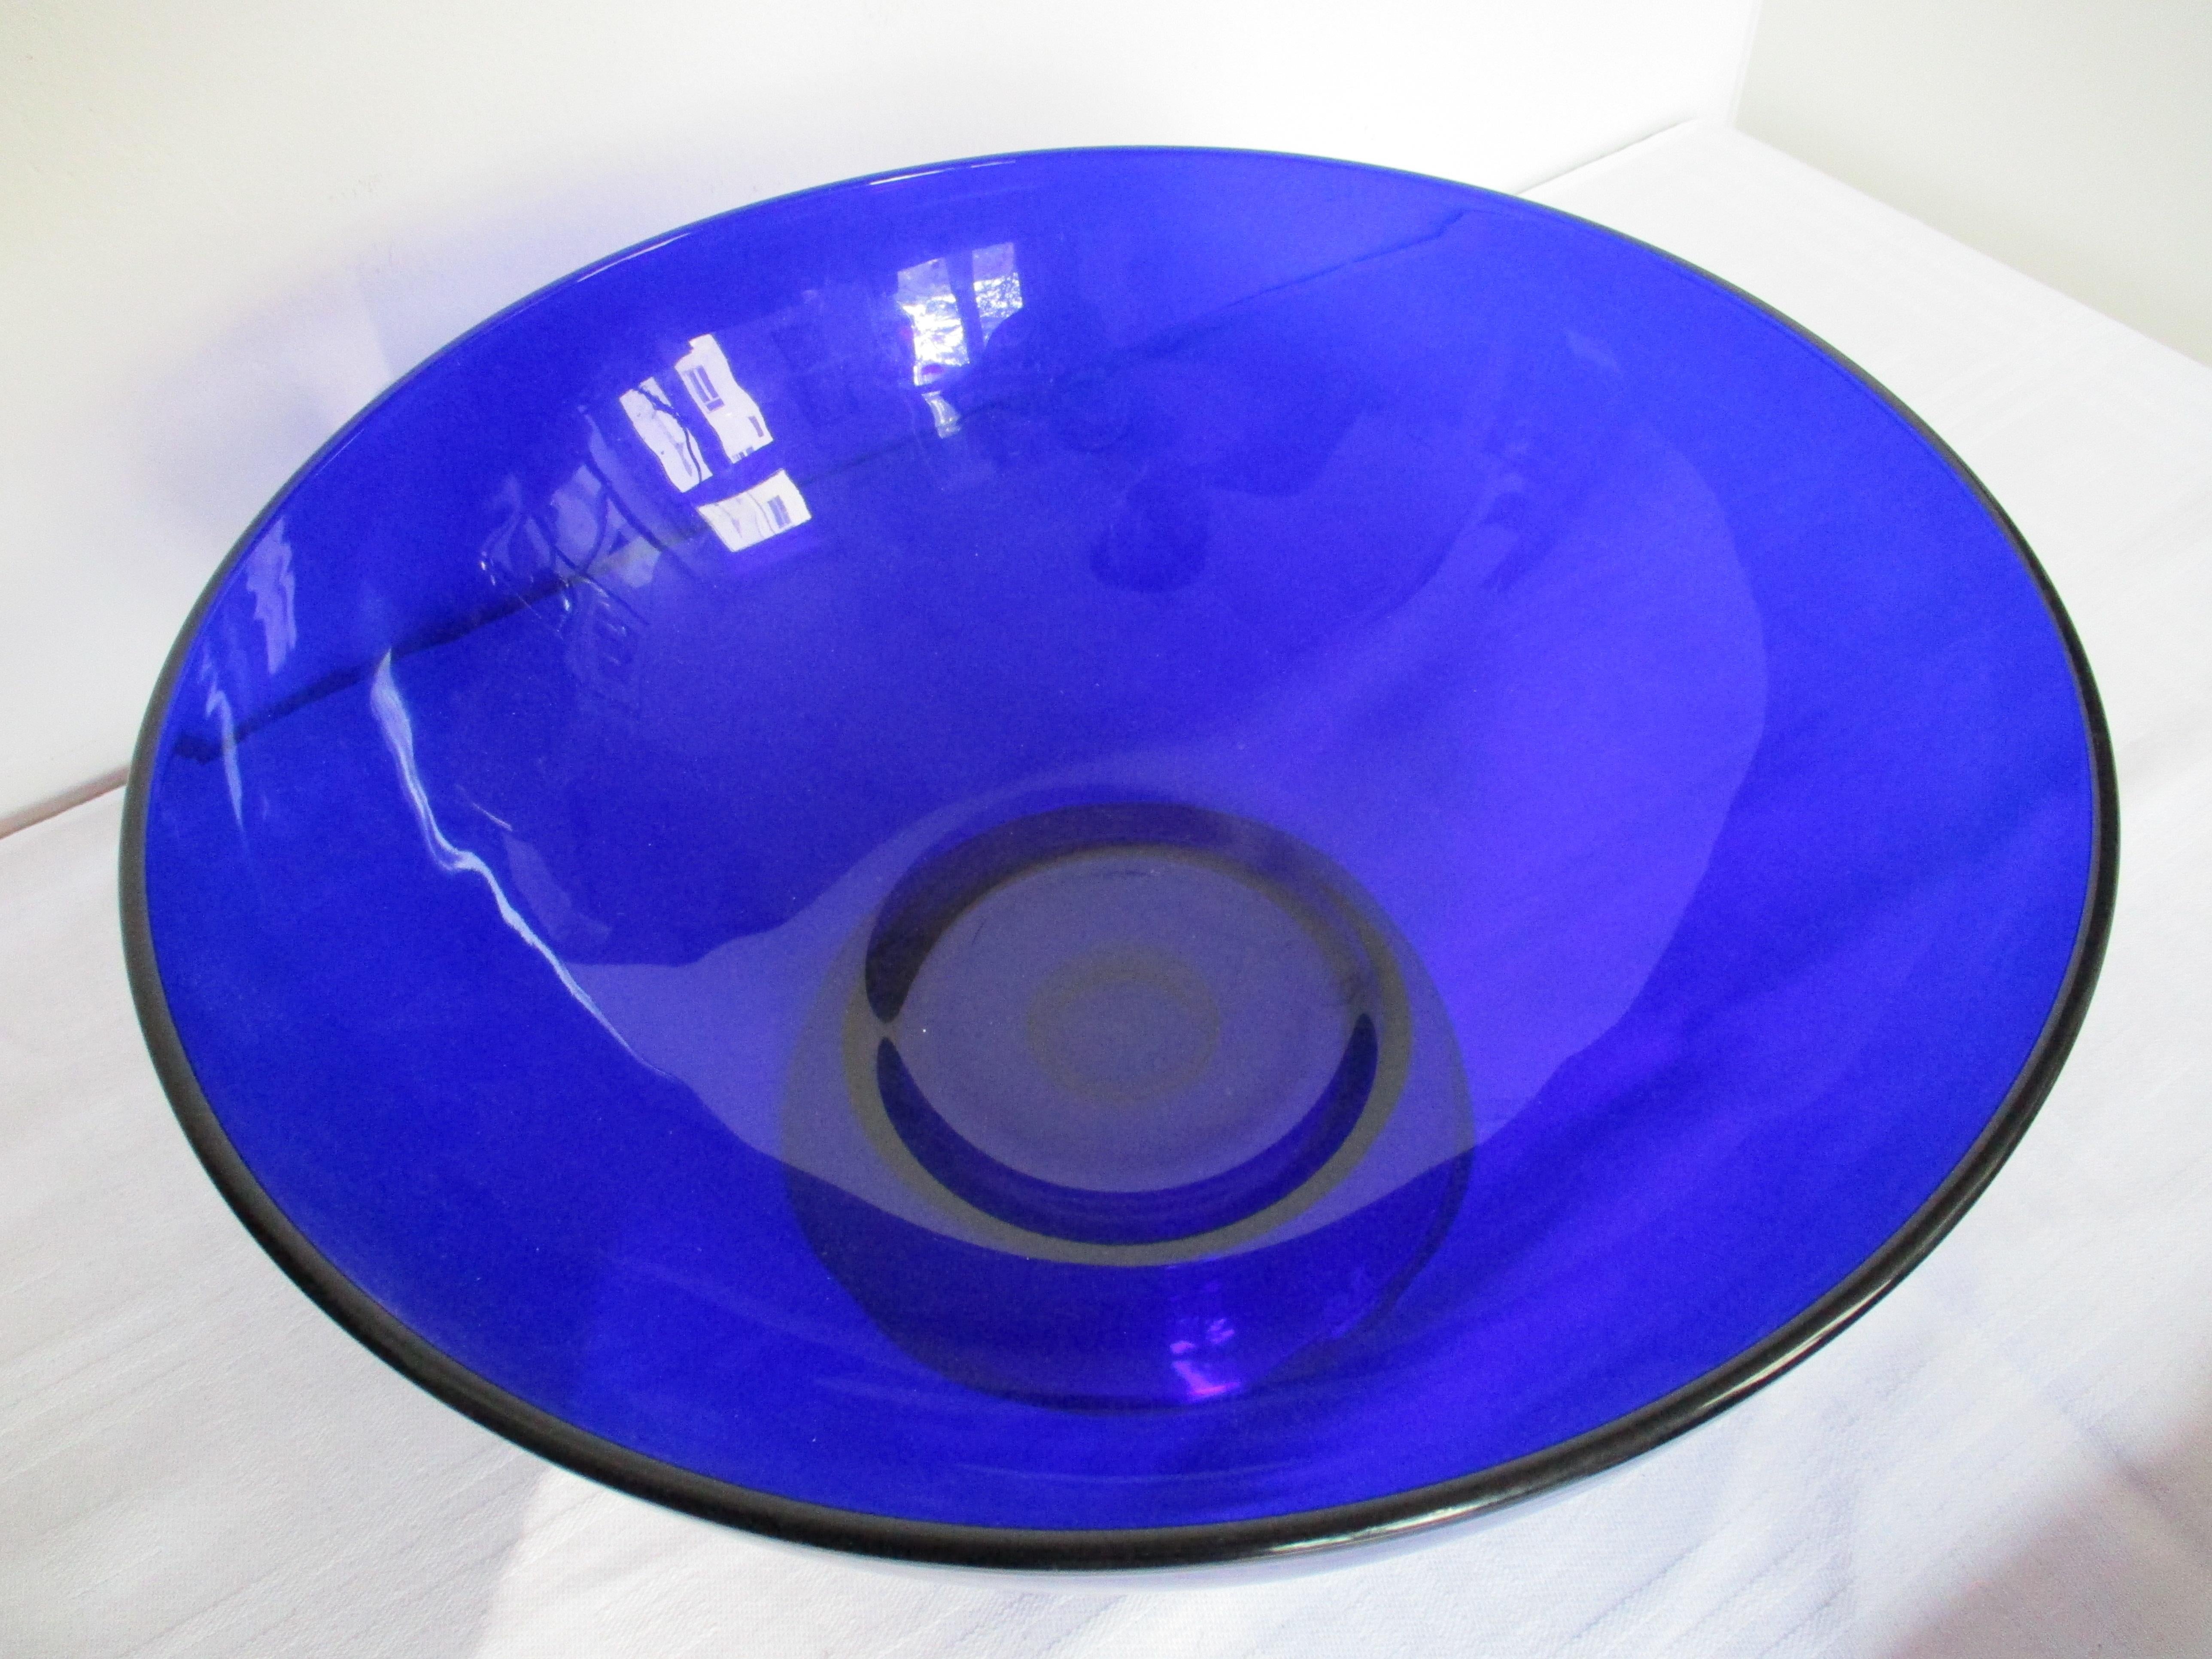 Beautiful cobalt blue bowl attributed to Josef Hoffmann and made by Lobmeyer in Vienna, Austria.
